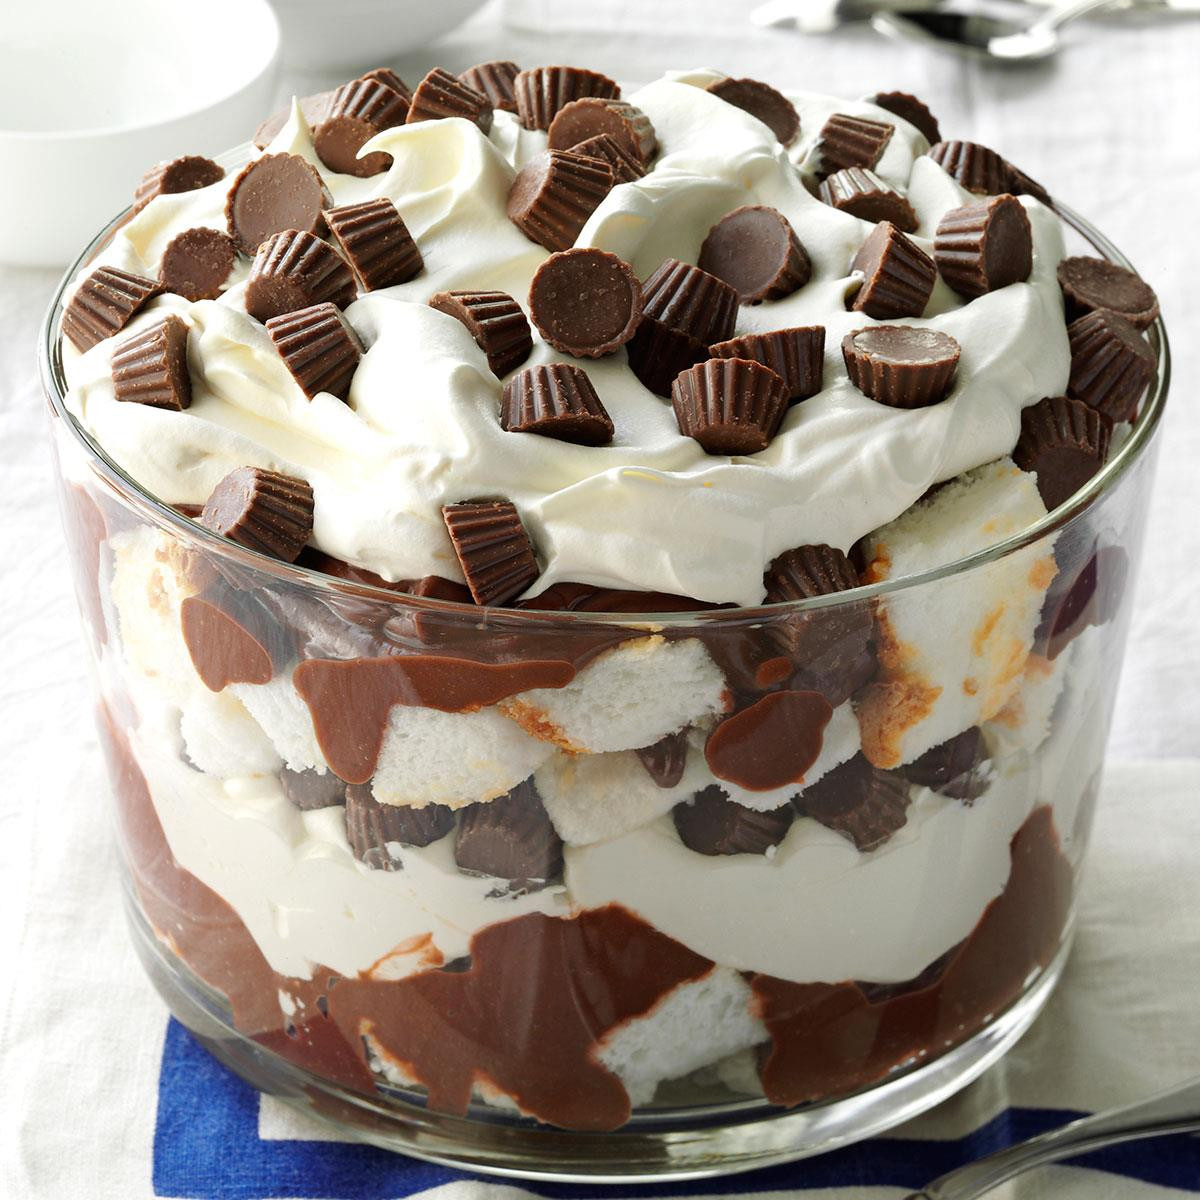 Easy Dessert Recipes With Pictures
 Peanut Butter Cup Trifle Recipe